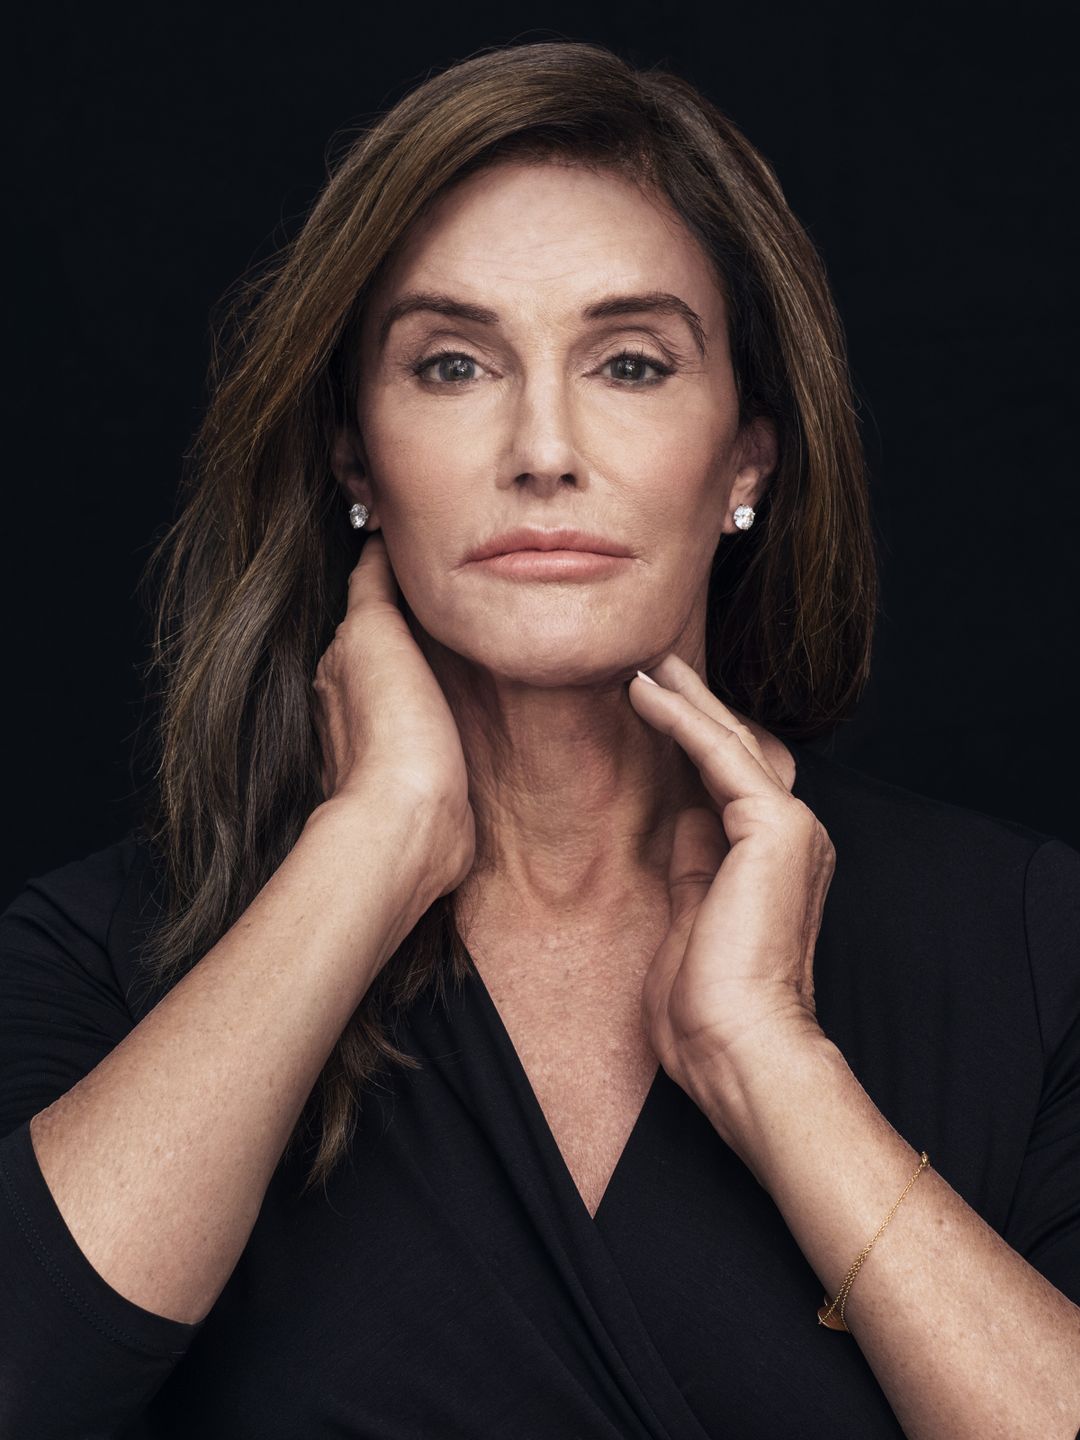 Caitlyn Jenner early childhood